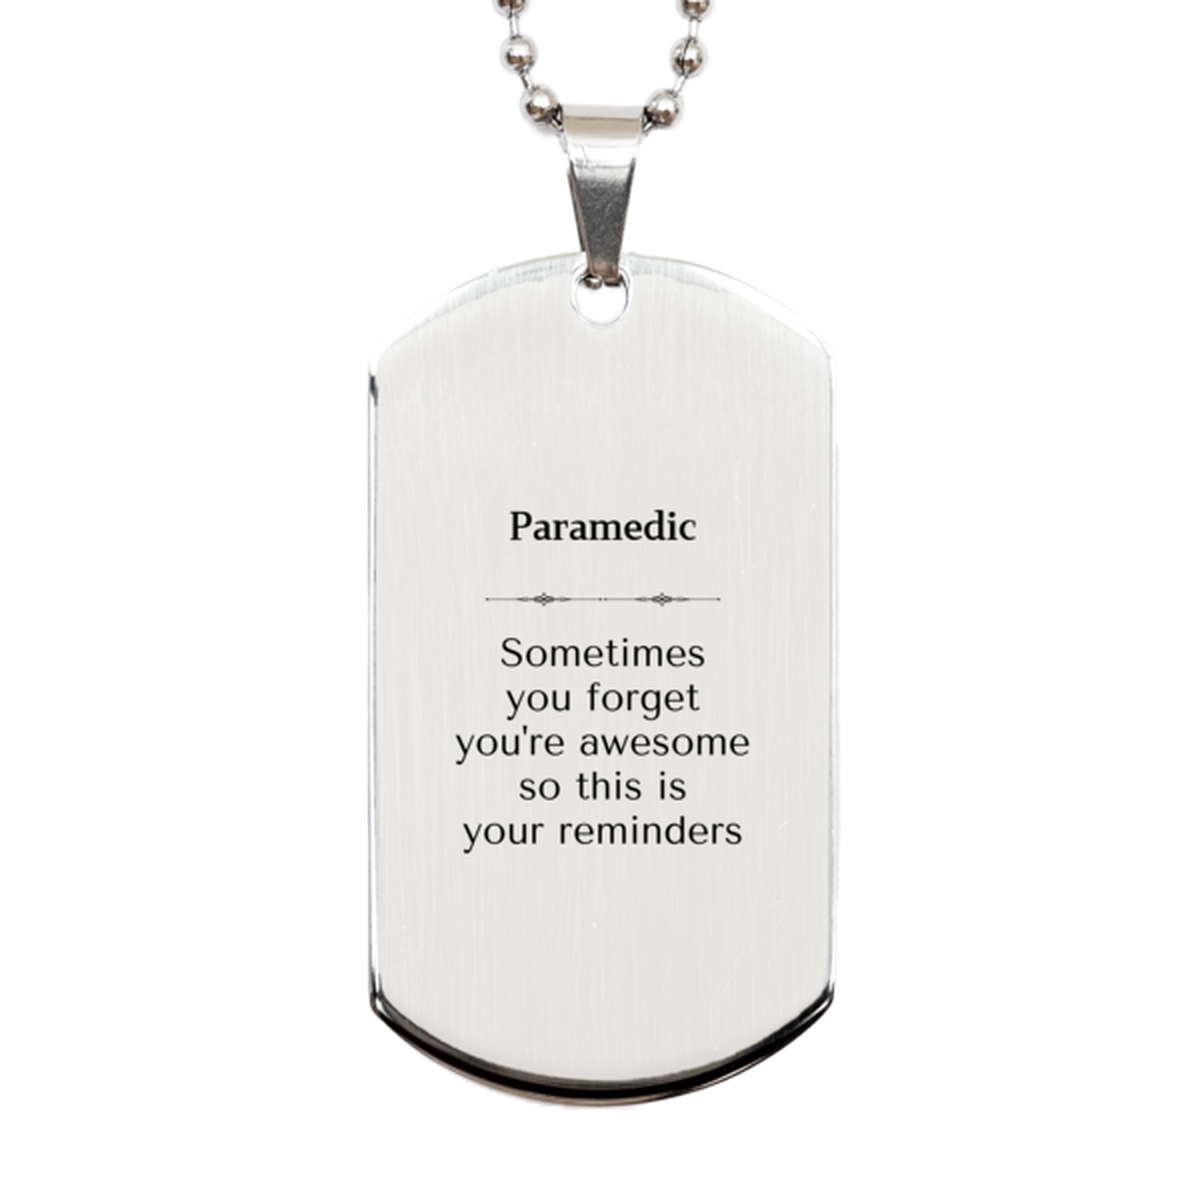 Sentimental Paramedic Silver Dog Tag, Paramedic Sometimes you forget you're awesome so this is your reminders, Graduation Christmas Birthday Gifts for Paramedic, Men, Women, Coworkers